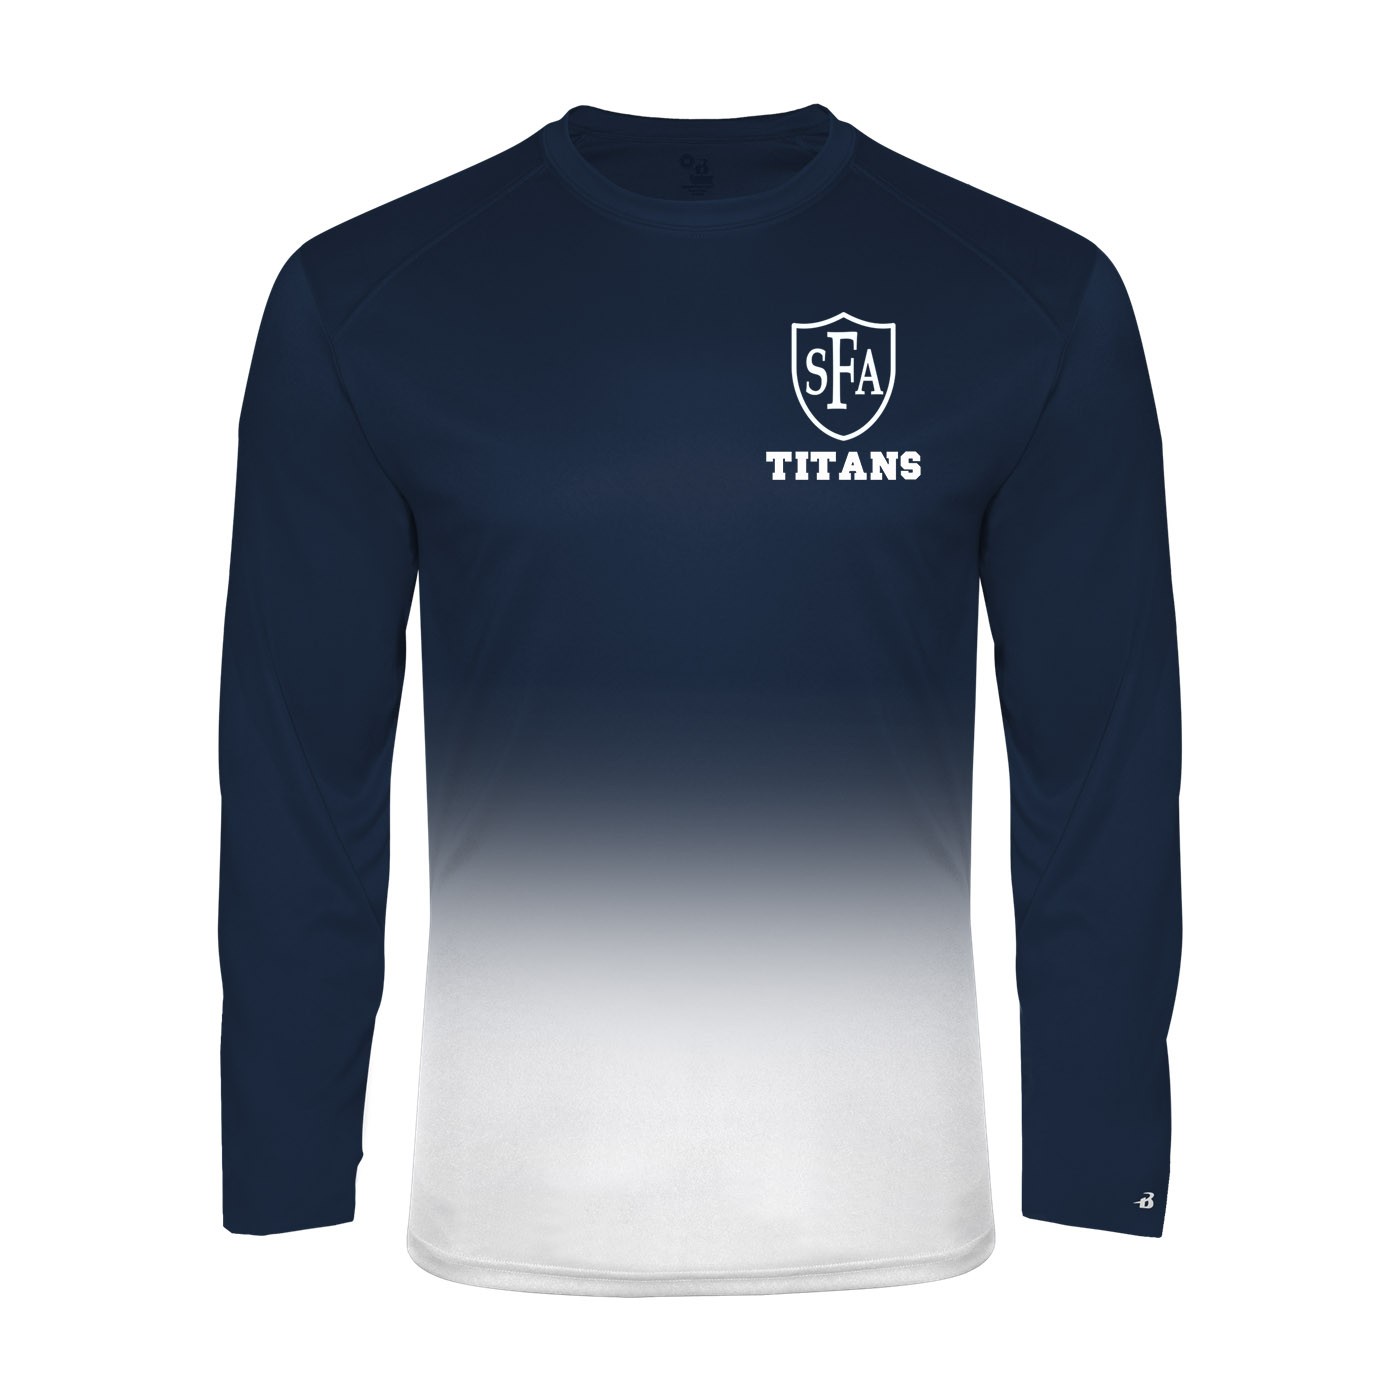 SFA Spirit Ombre L/S T-Shirt w/ Titan Logo - Please Allow 2-3 Weeks for Delivery